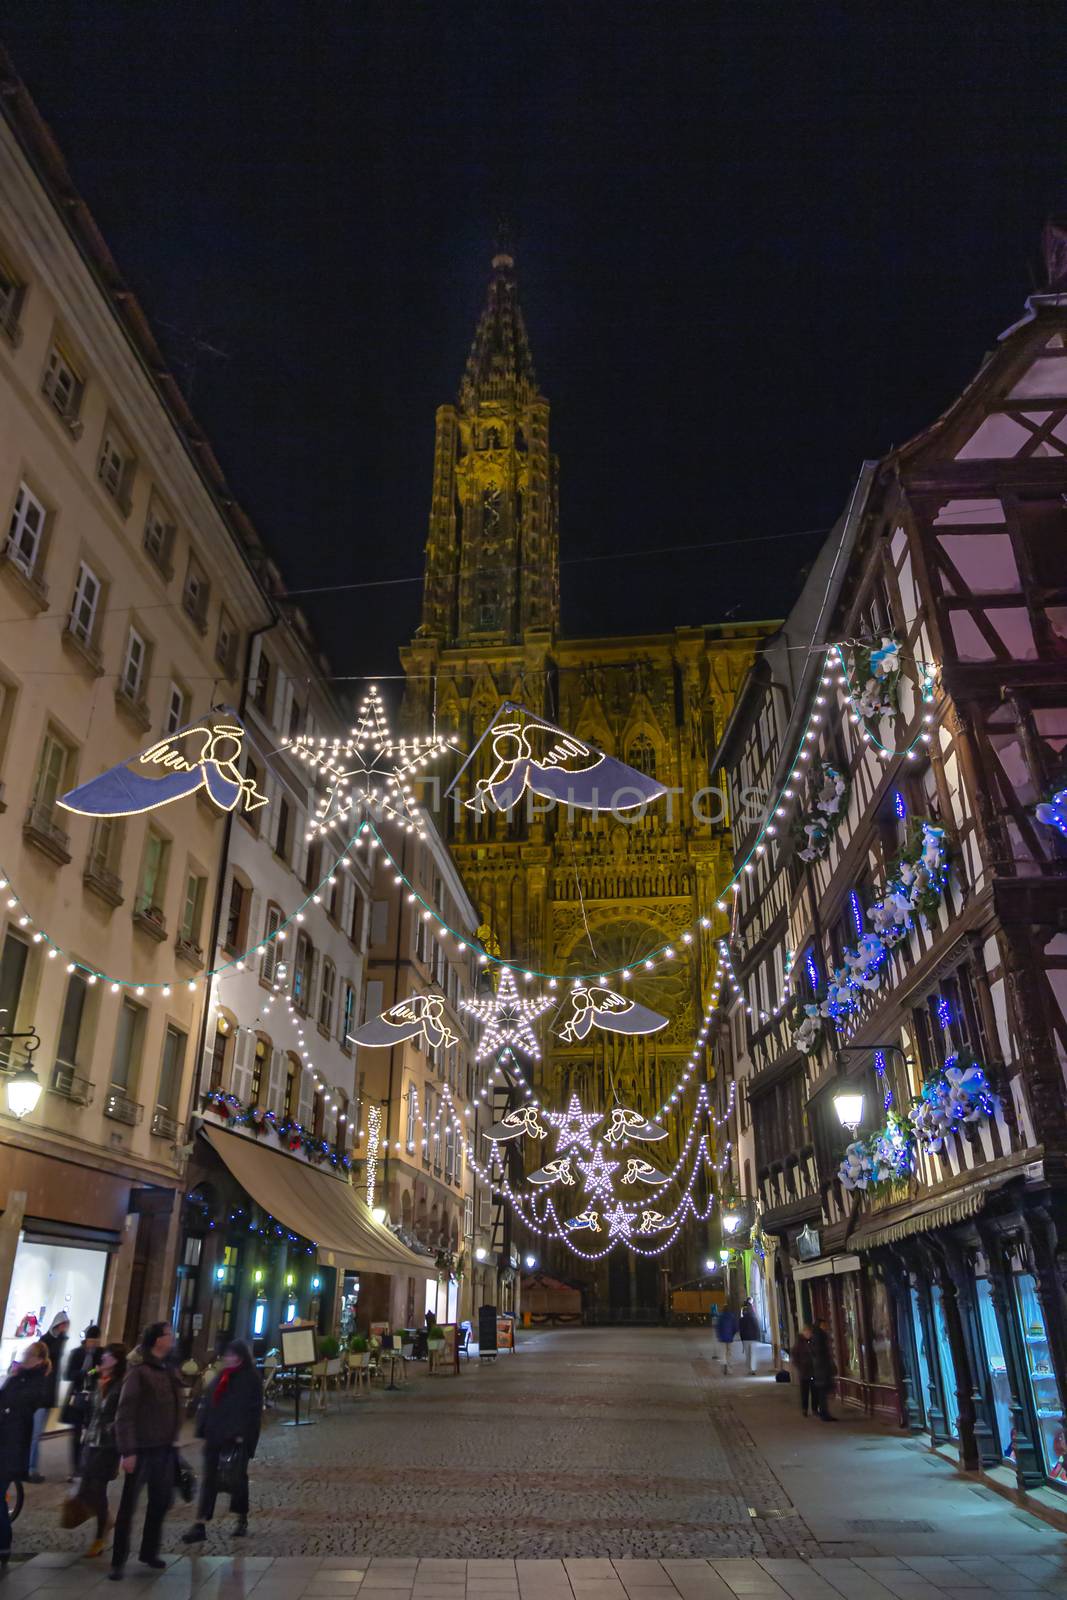 Late night shopping time in front Strasbourg cathedral during the festive and happening Christmas season